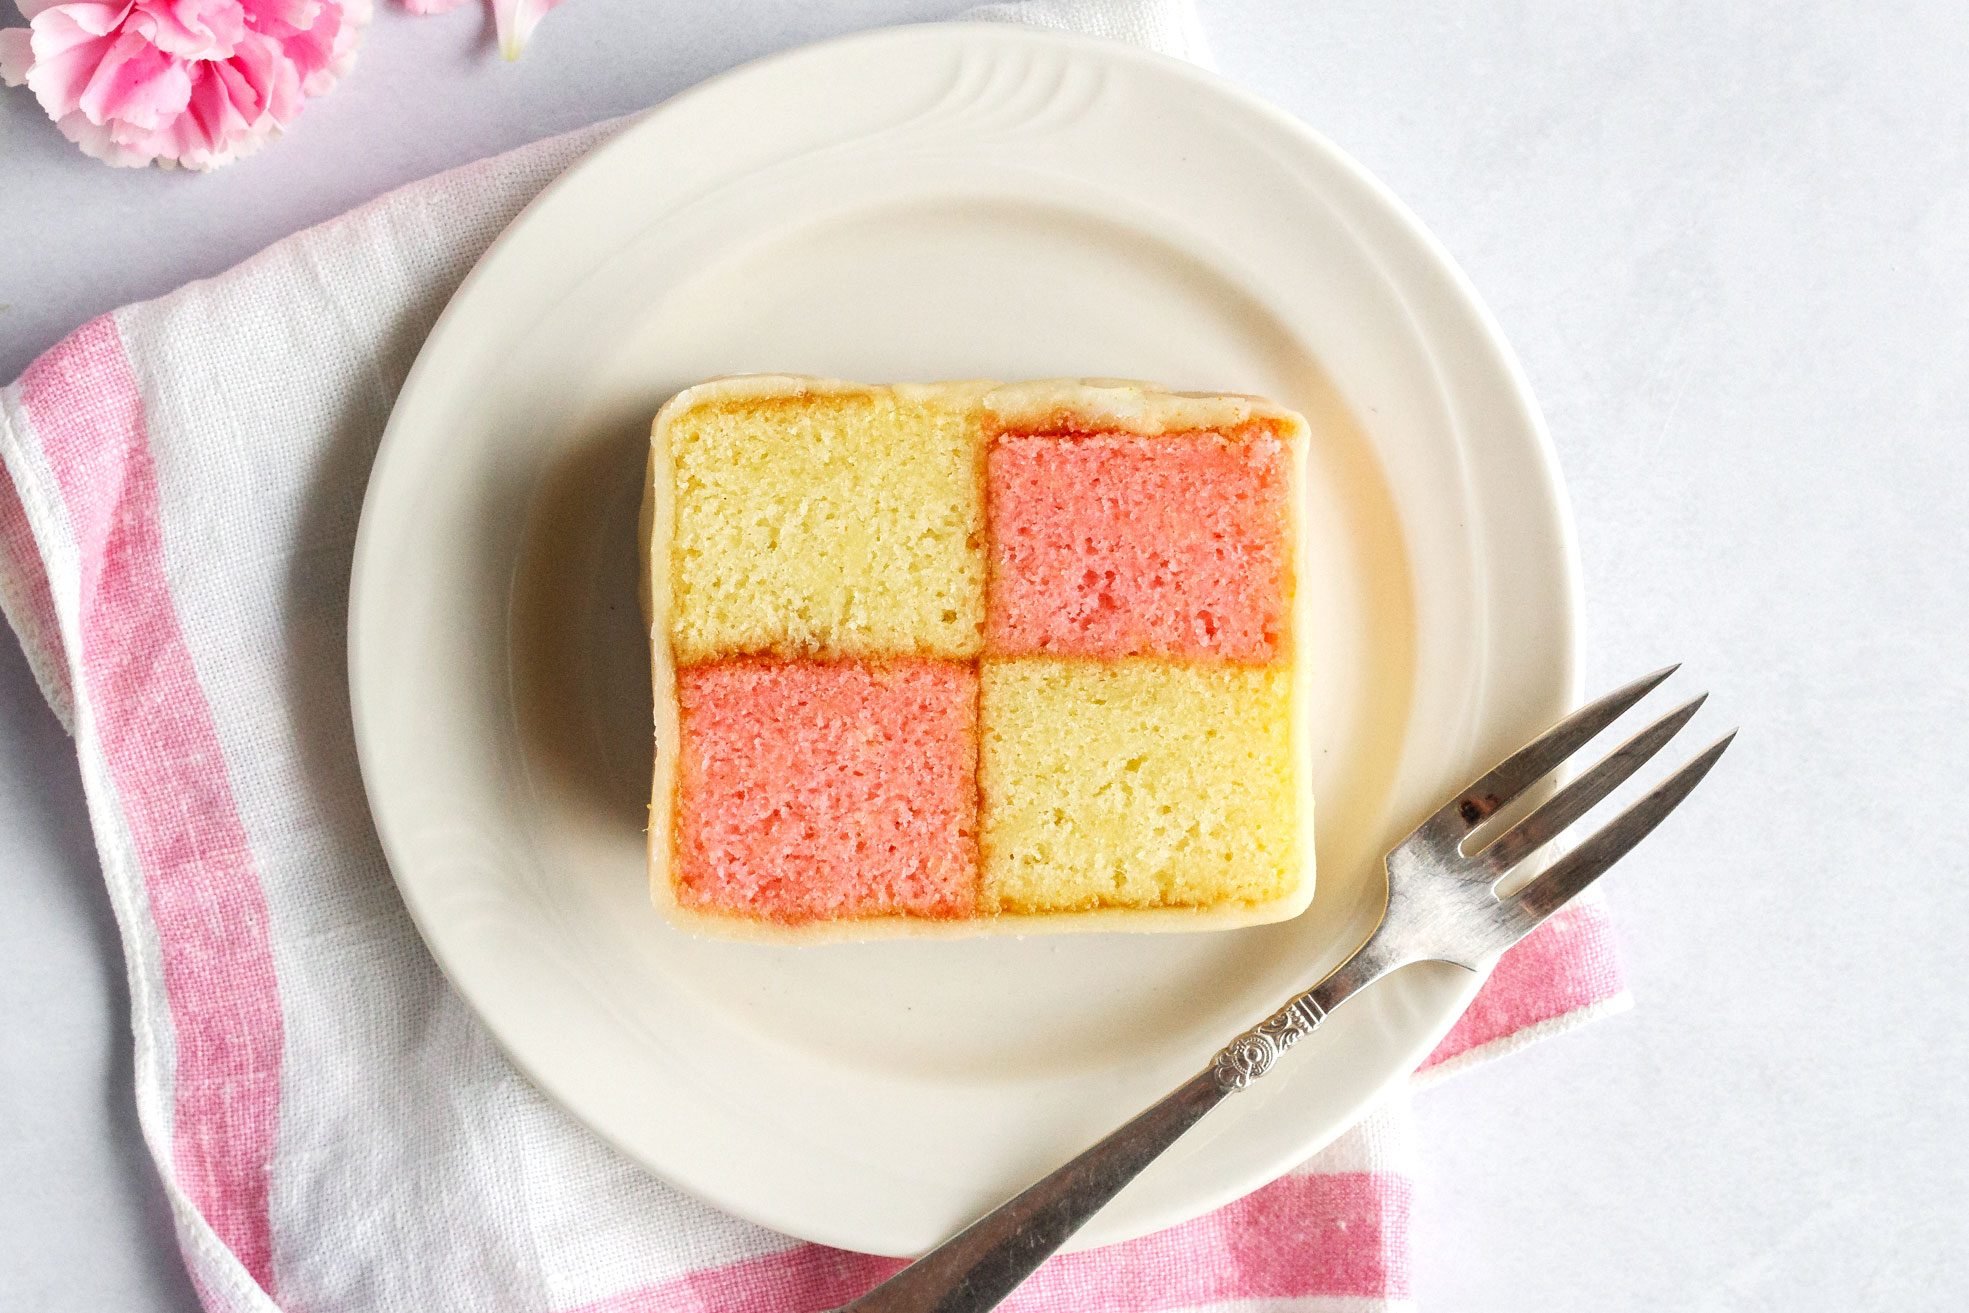 I Made “Battenberg Cake,” One of the Most Popular Great British Baking Show Desserts